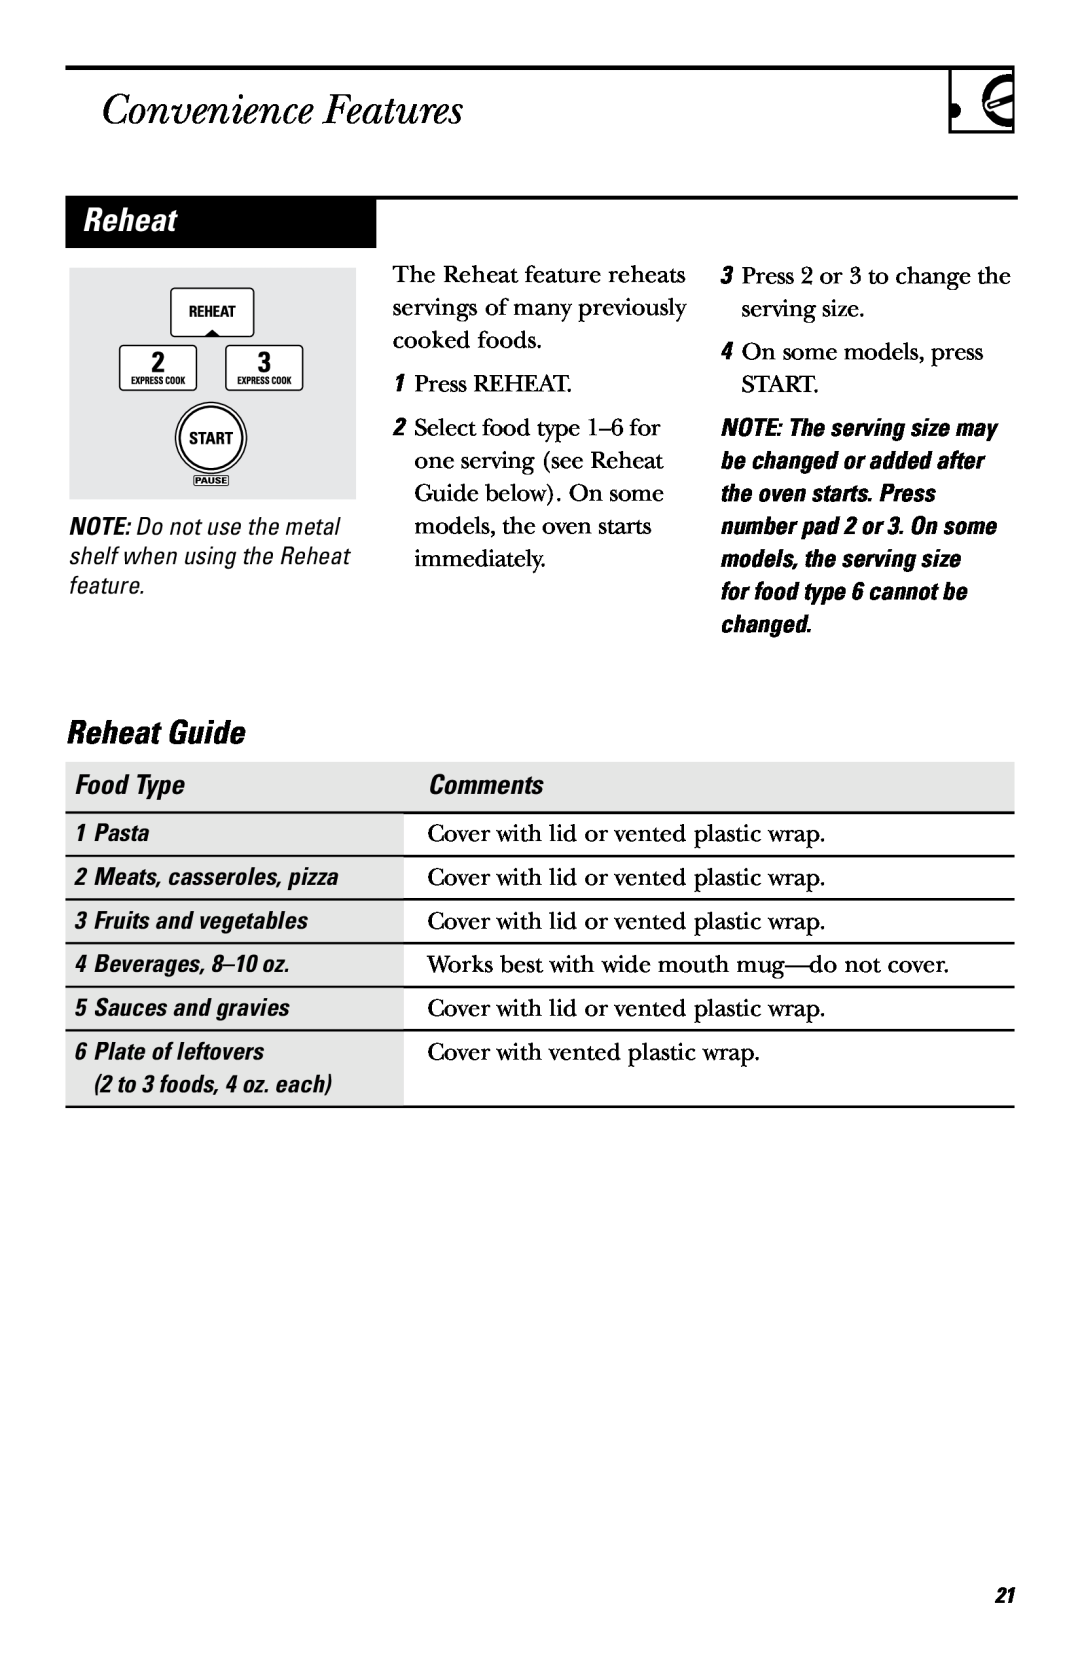 GE JVM1440WH Reheat Guide, Food Type, Convenience Features, Comments, Pasta, Cover with lid or vented plastic wrap 